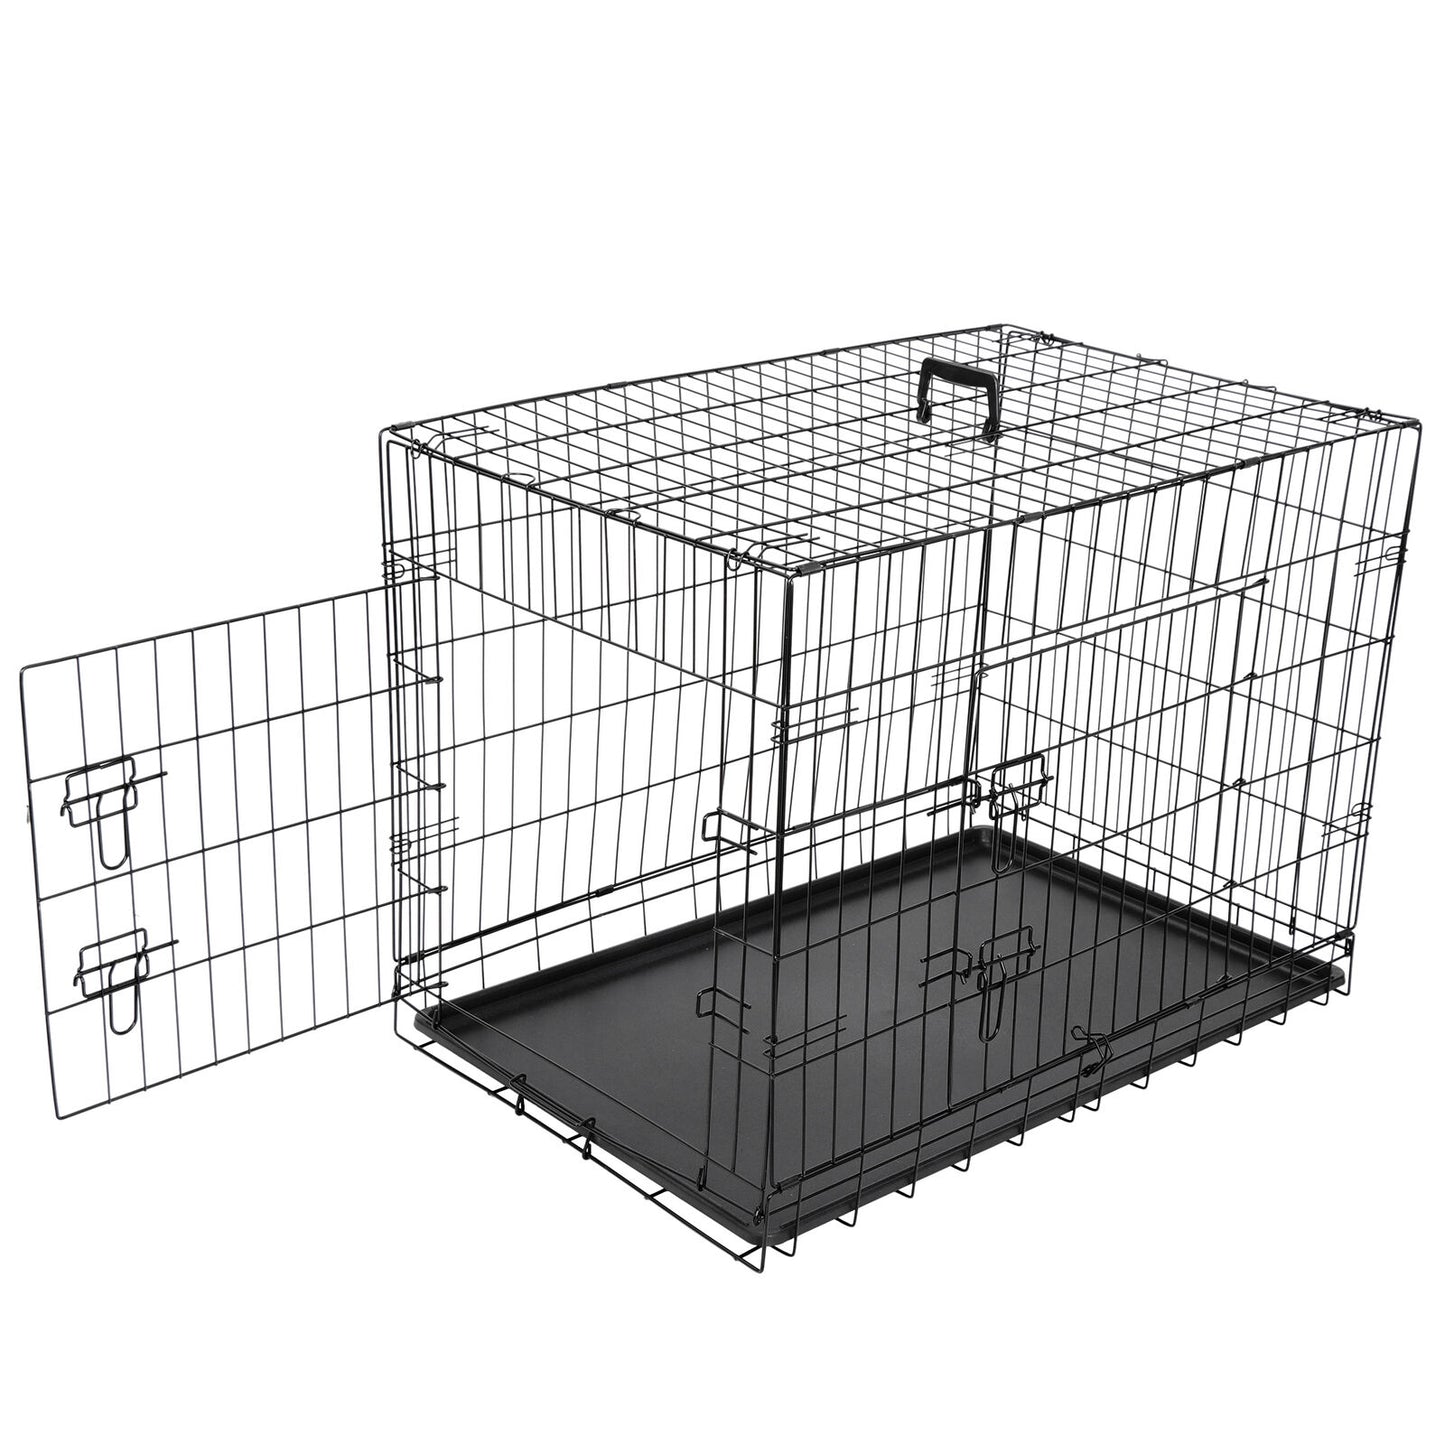 36" Black Metal Dog Crate Kennel Folding Pet Cage 2 Doors With Tray Pan